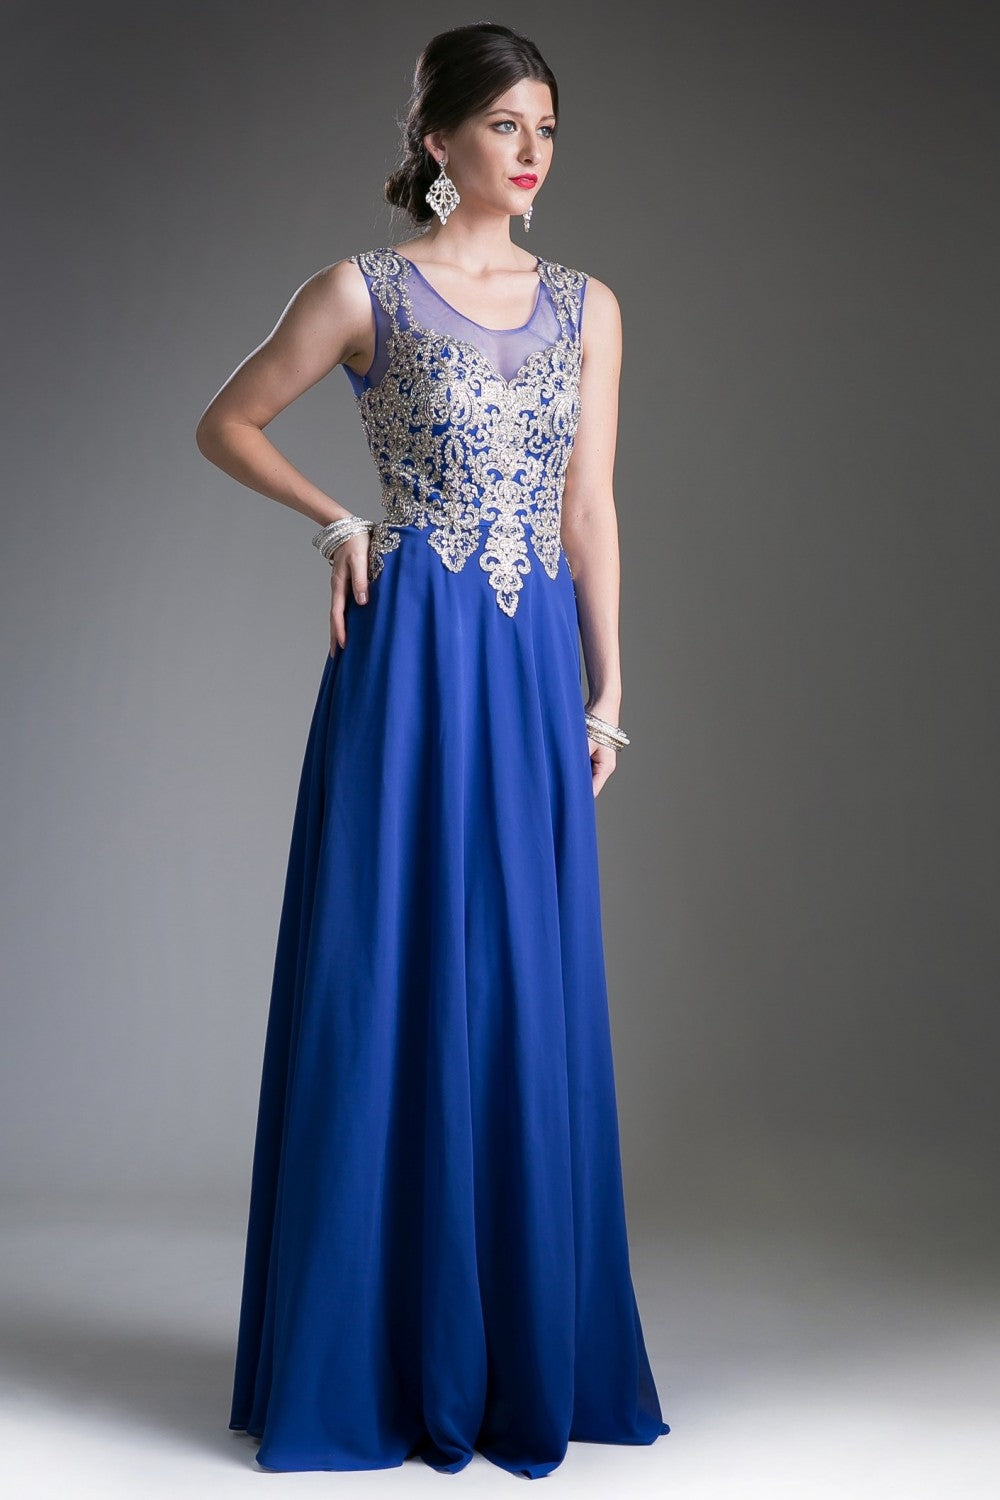 MyFashion.com - A-line chiffon gown with lace embellished bodice(2635) - Cinderella Divine promdress eveningdress fashion partydress weddingdress 
 gown homecoming promgown weddinggown 